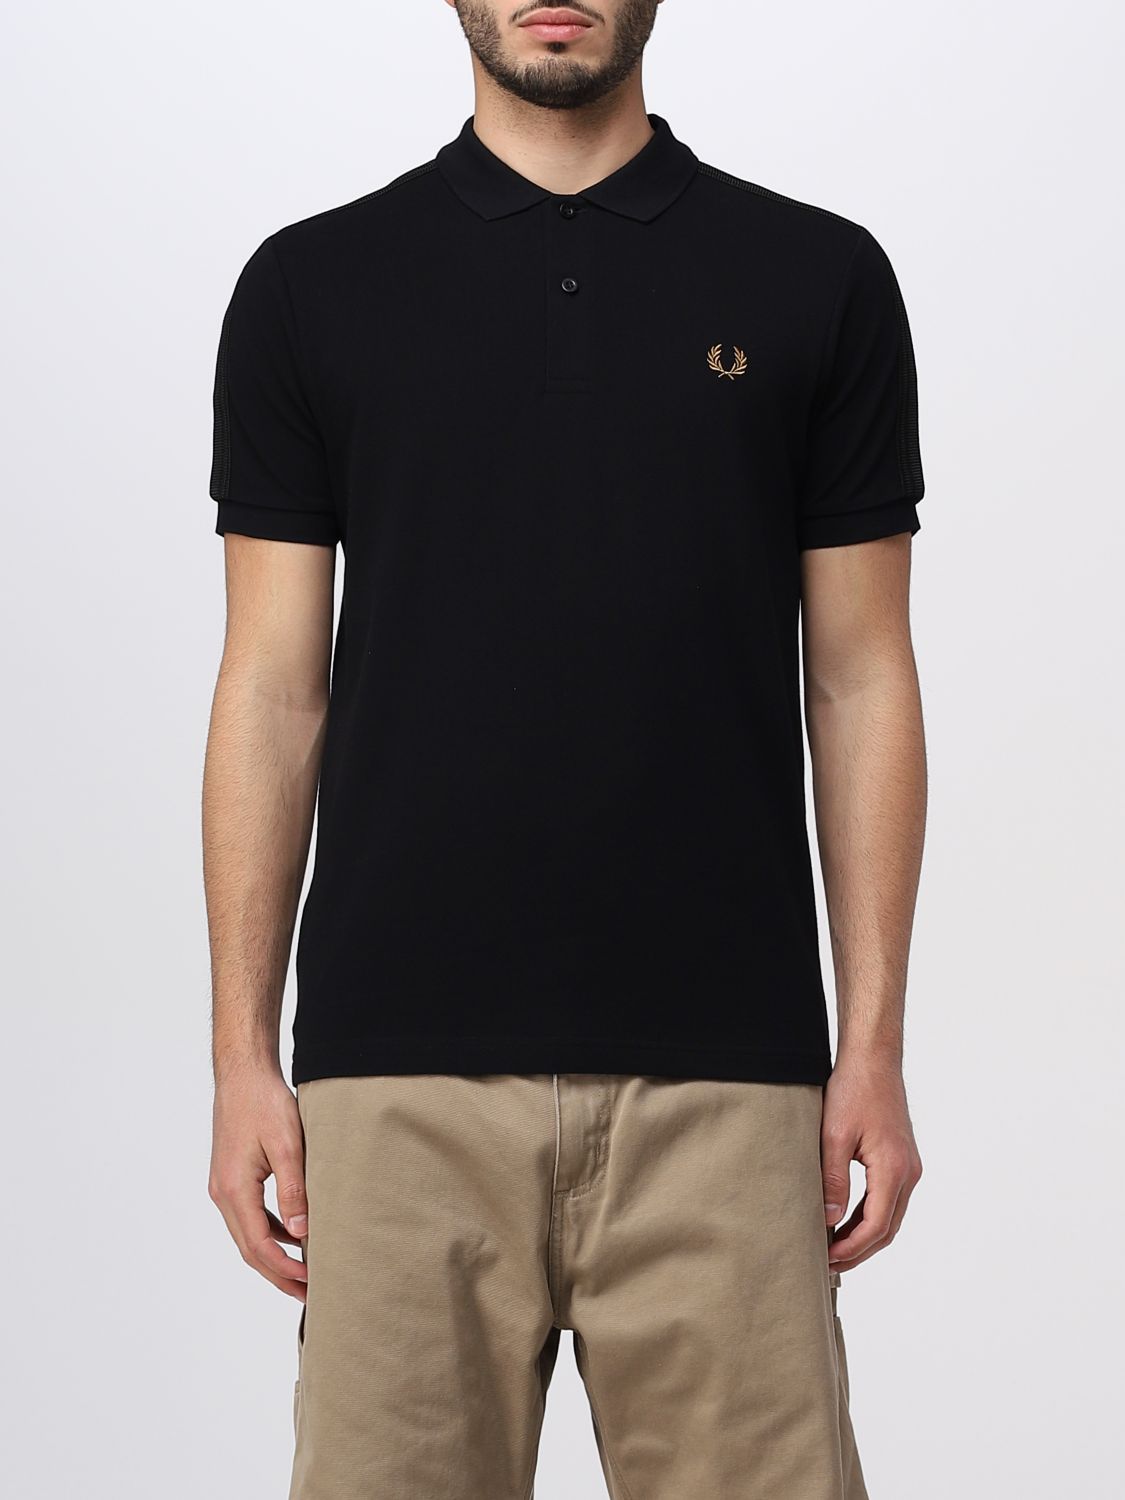 FRED PERRY: polo shirt for man - Black | Fred Perry polo shirt M5602 ...